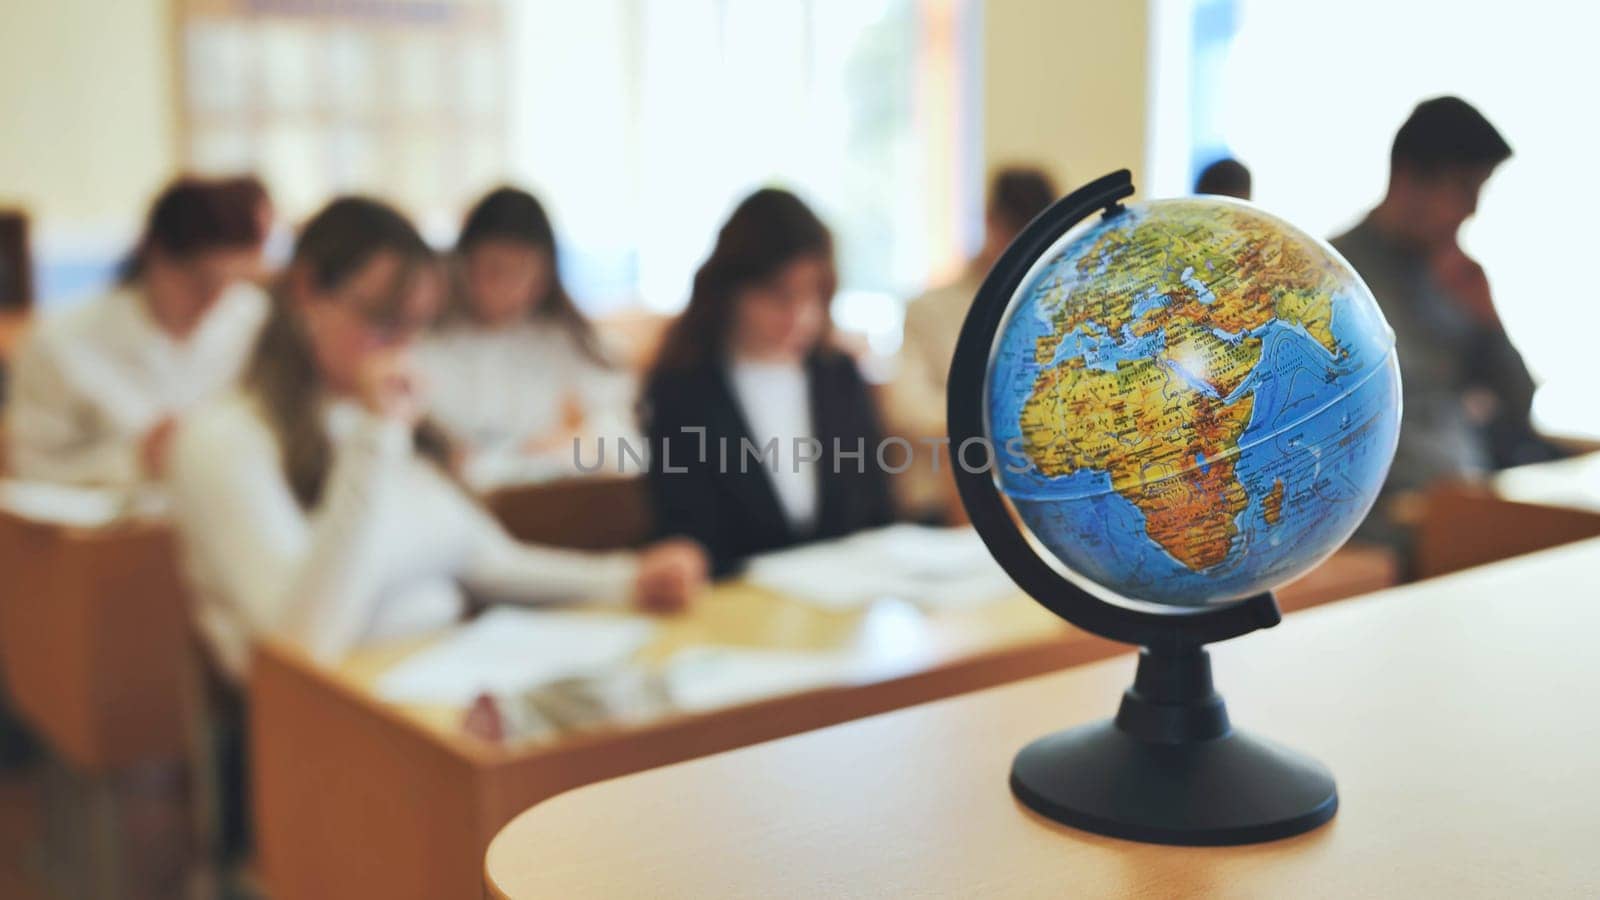 A globe of the world in a school classroom during a lesson. The globe shows Africa and Eurasia. by DovidPro